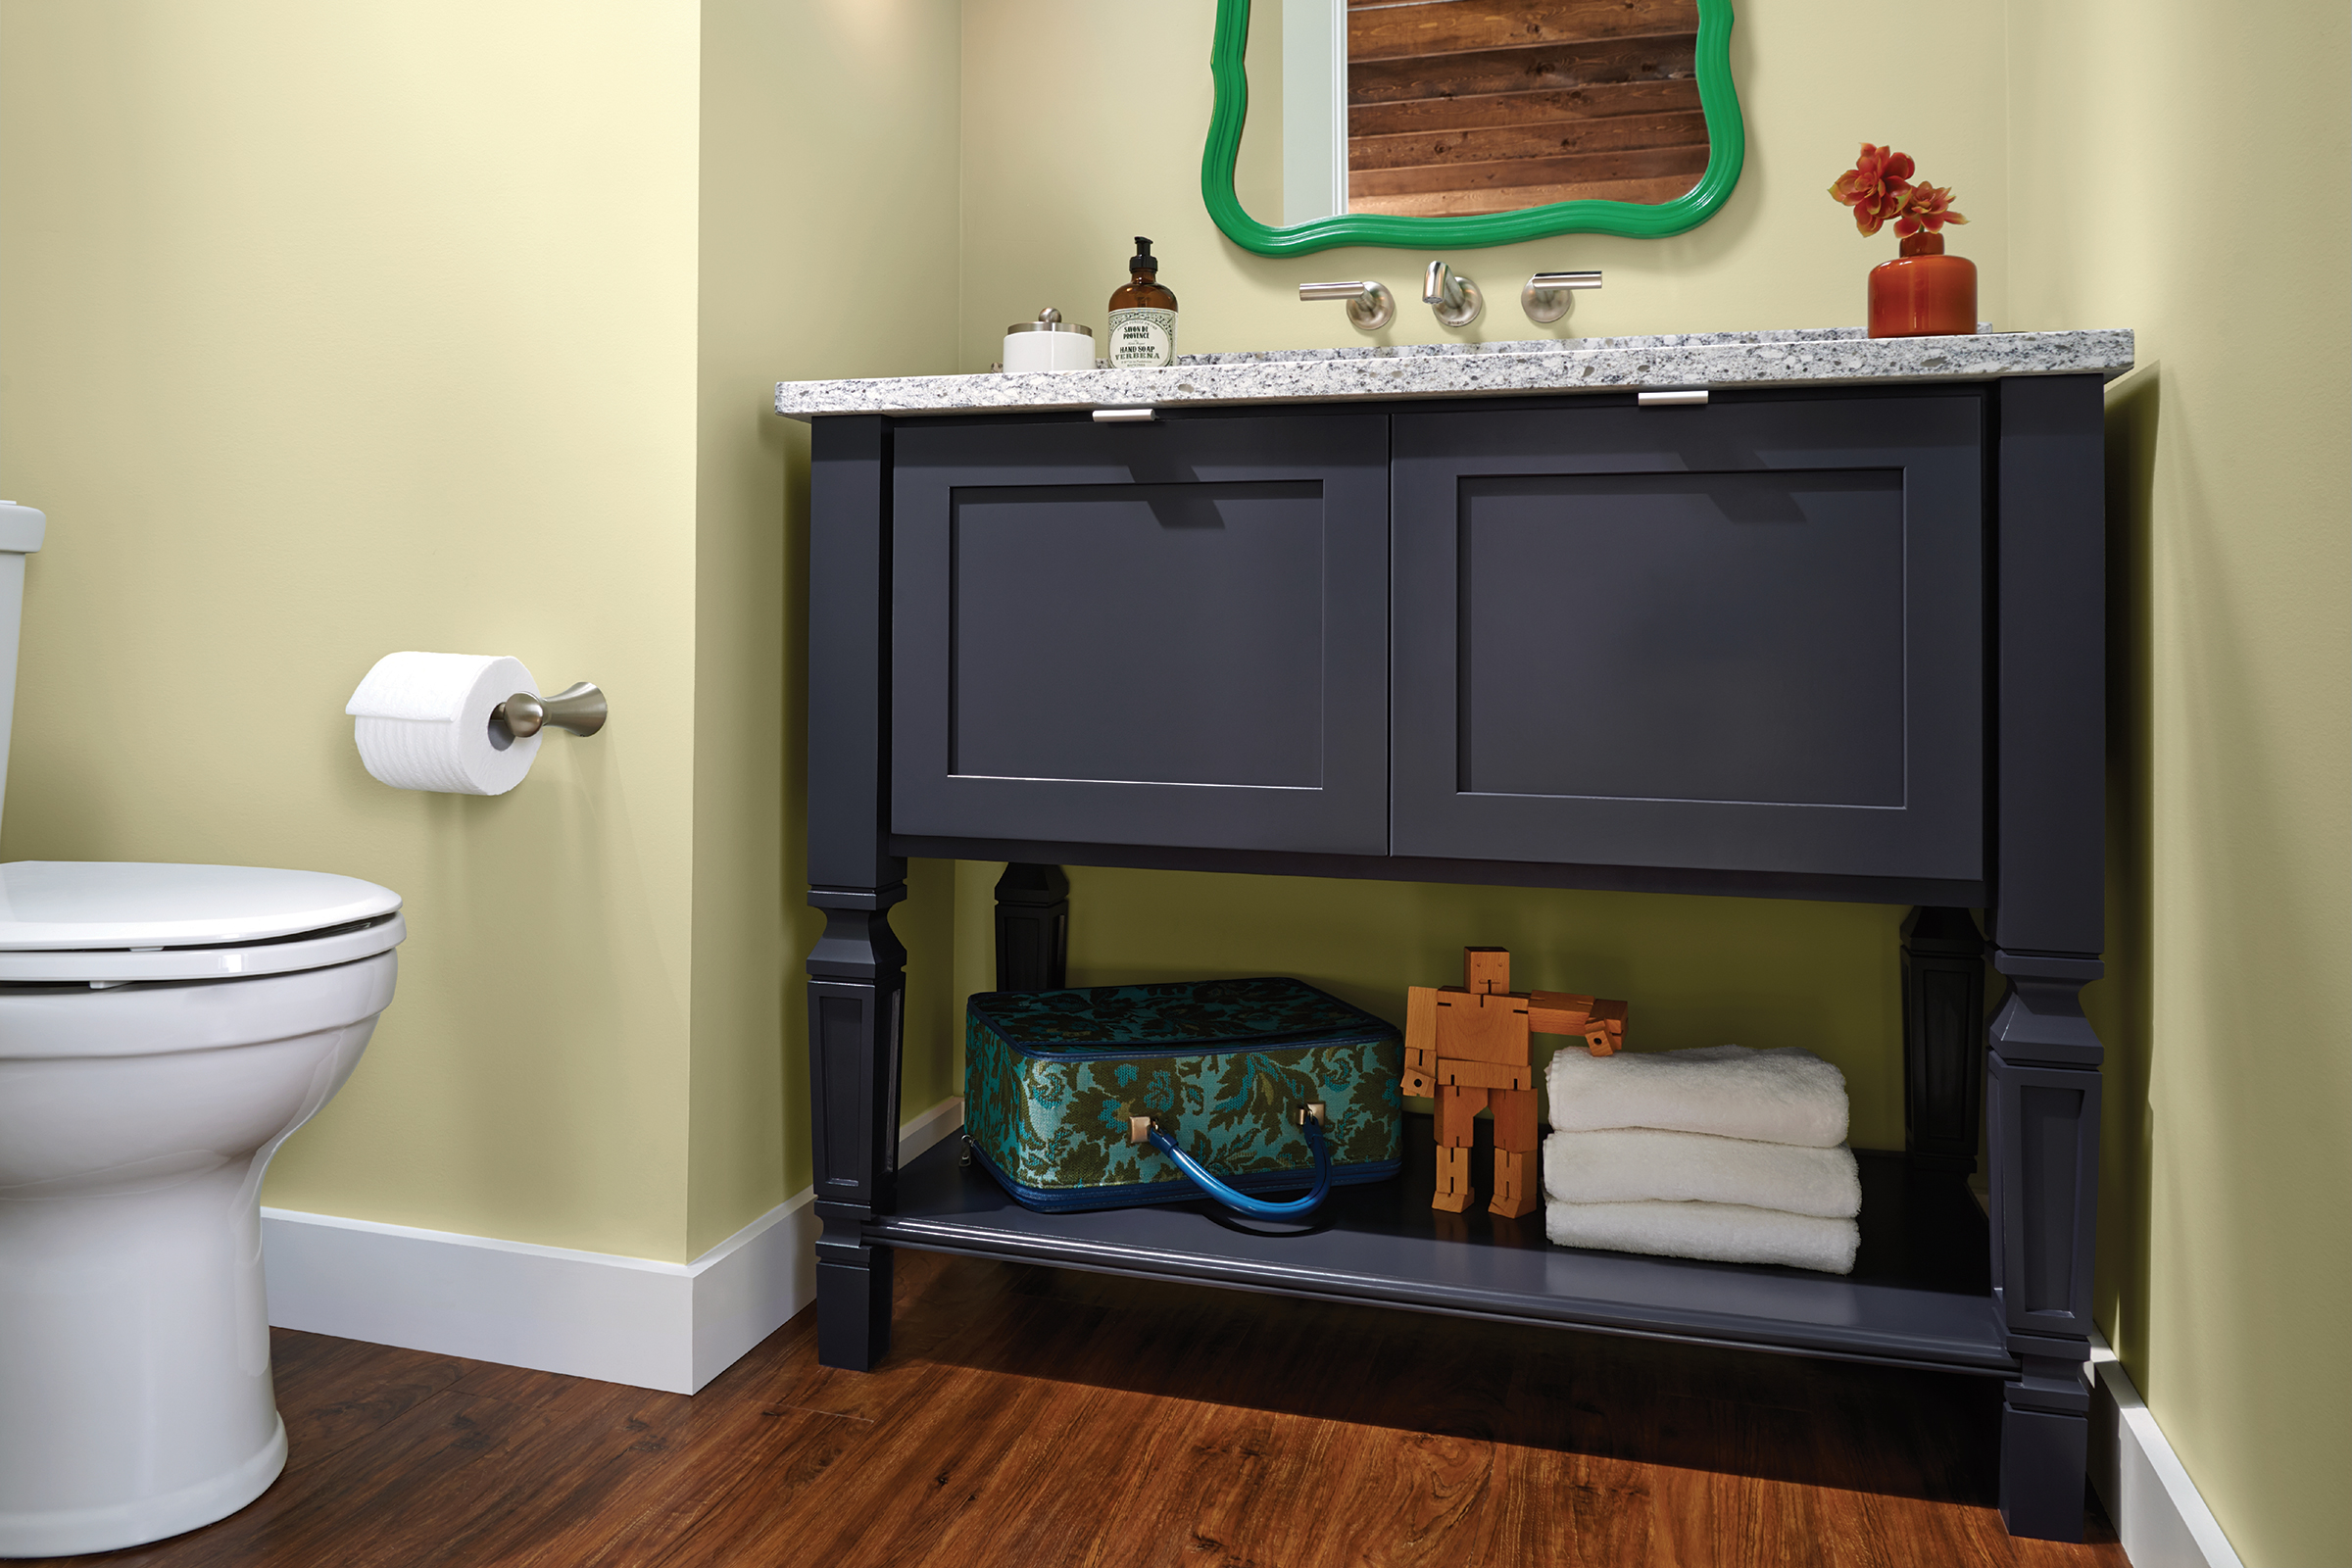 KraftMaid bathroom vanity sink cabinet with lower storage shelf and carved legs in Midnight painted finish 